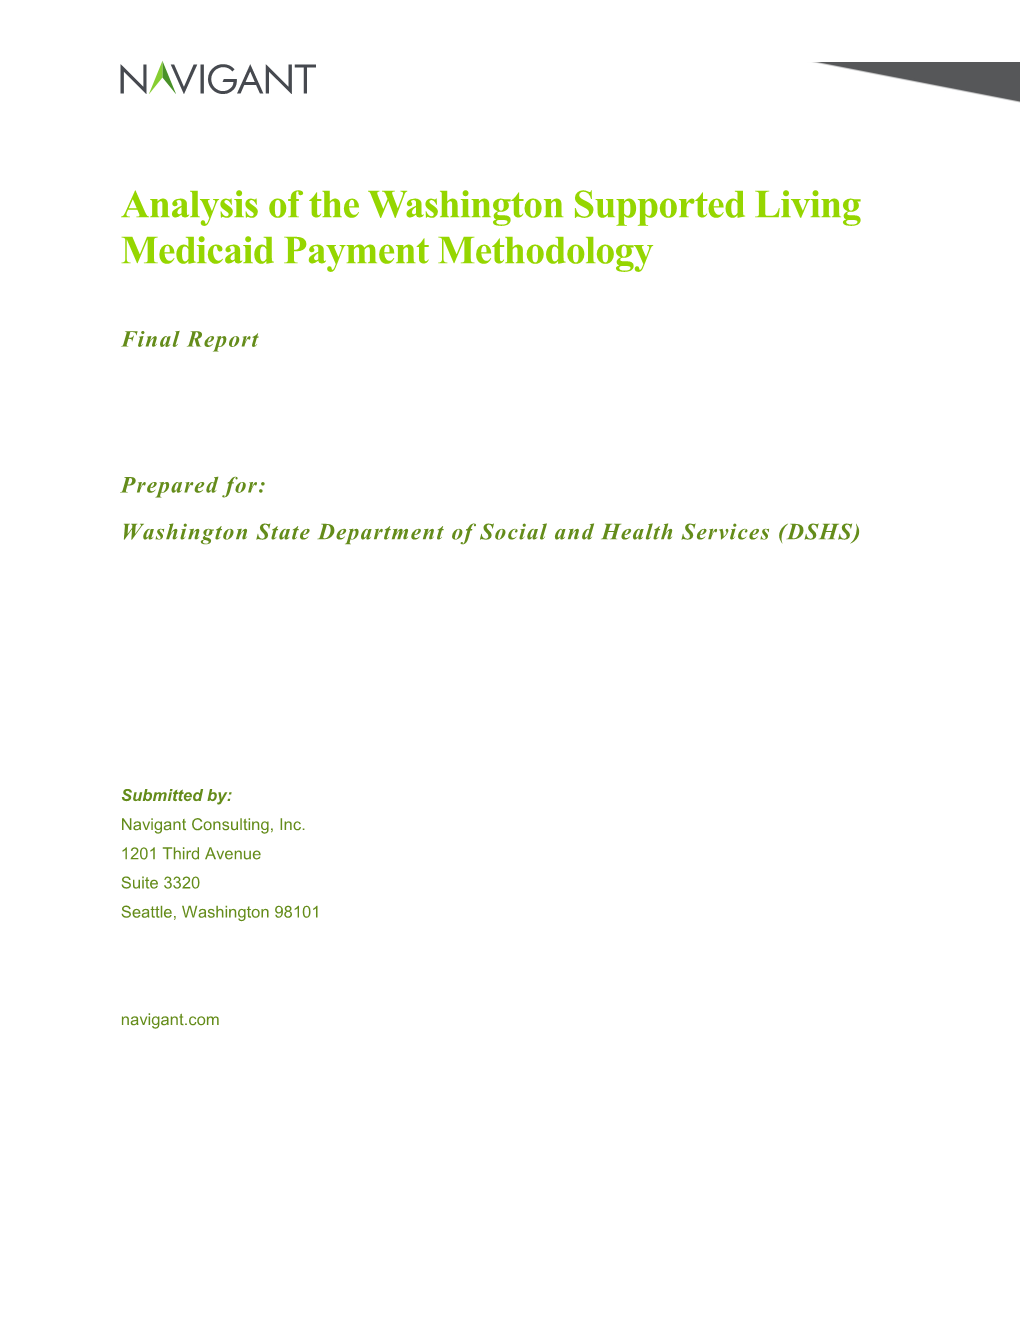 Analysis of the Washington Supported Livingmedicaid Payment Methodology